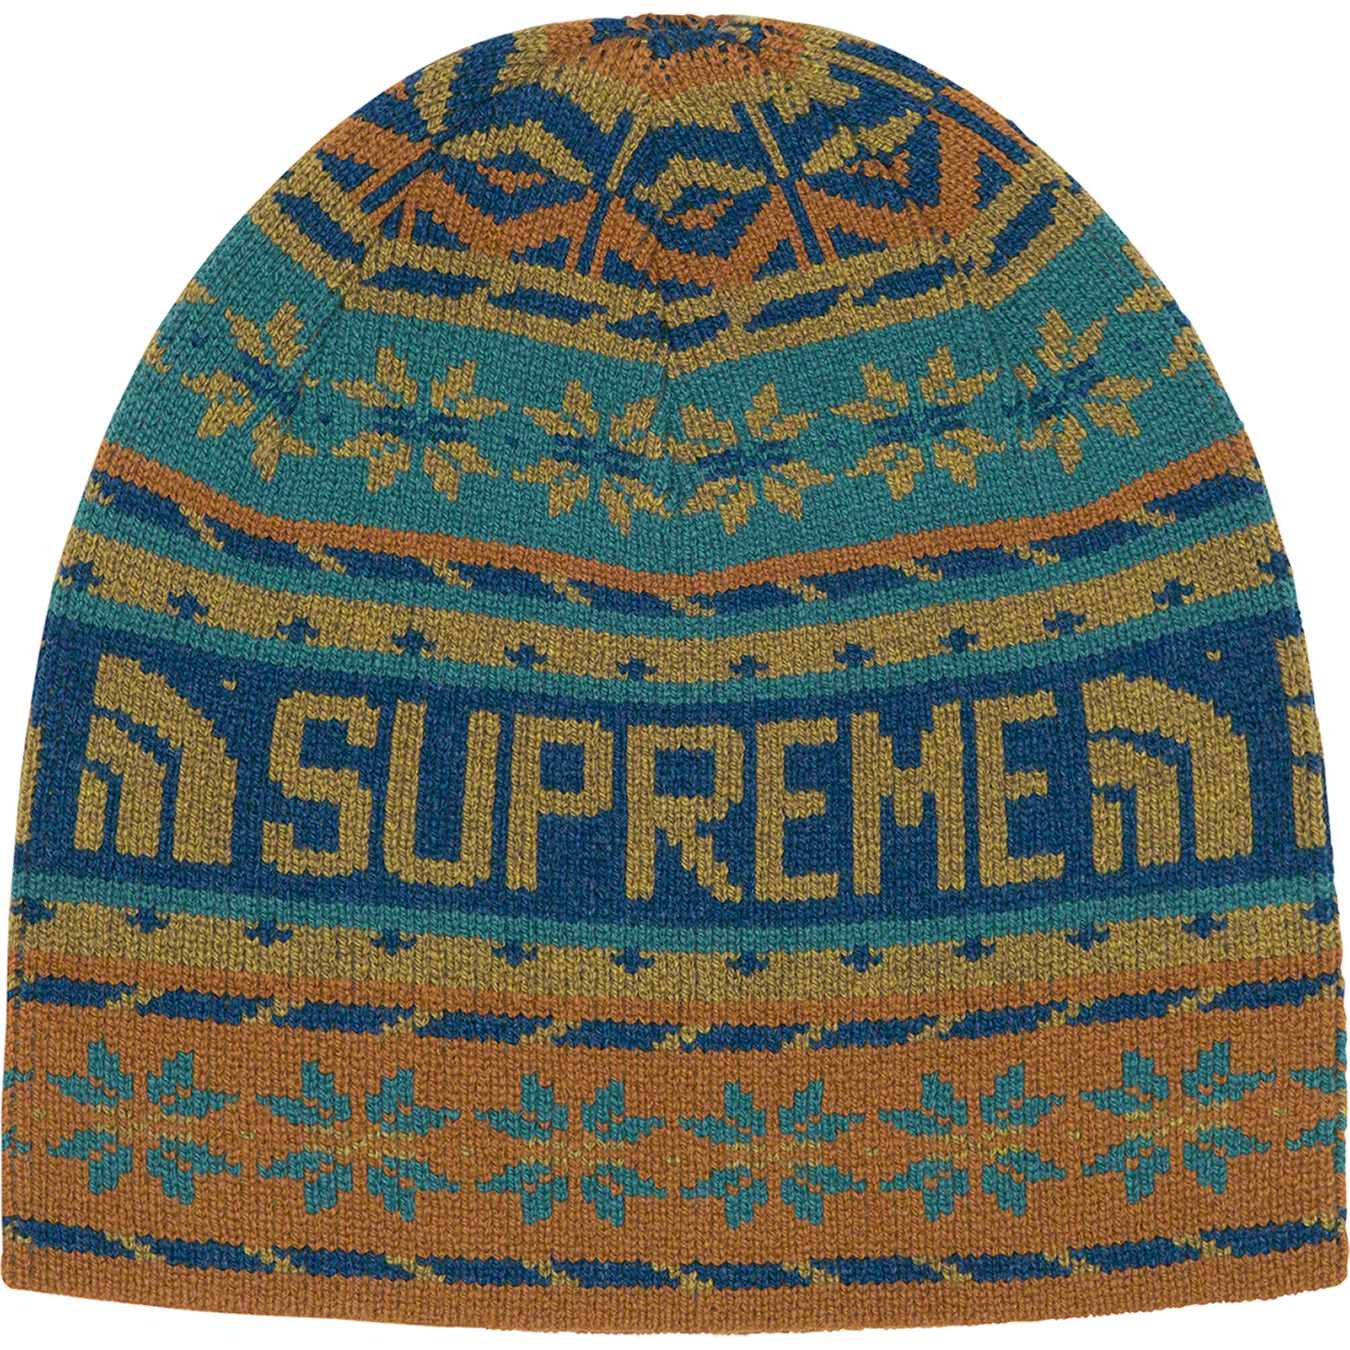 The North Face Beanie - fall winter 2022 - Supreme